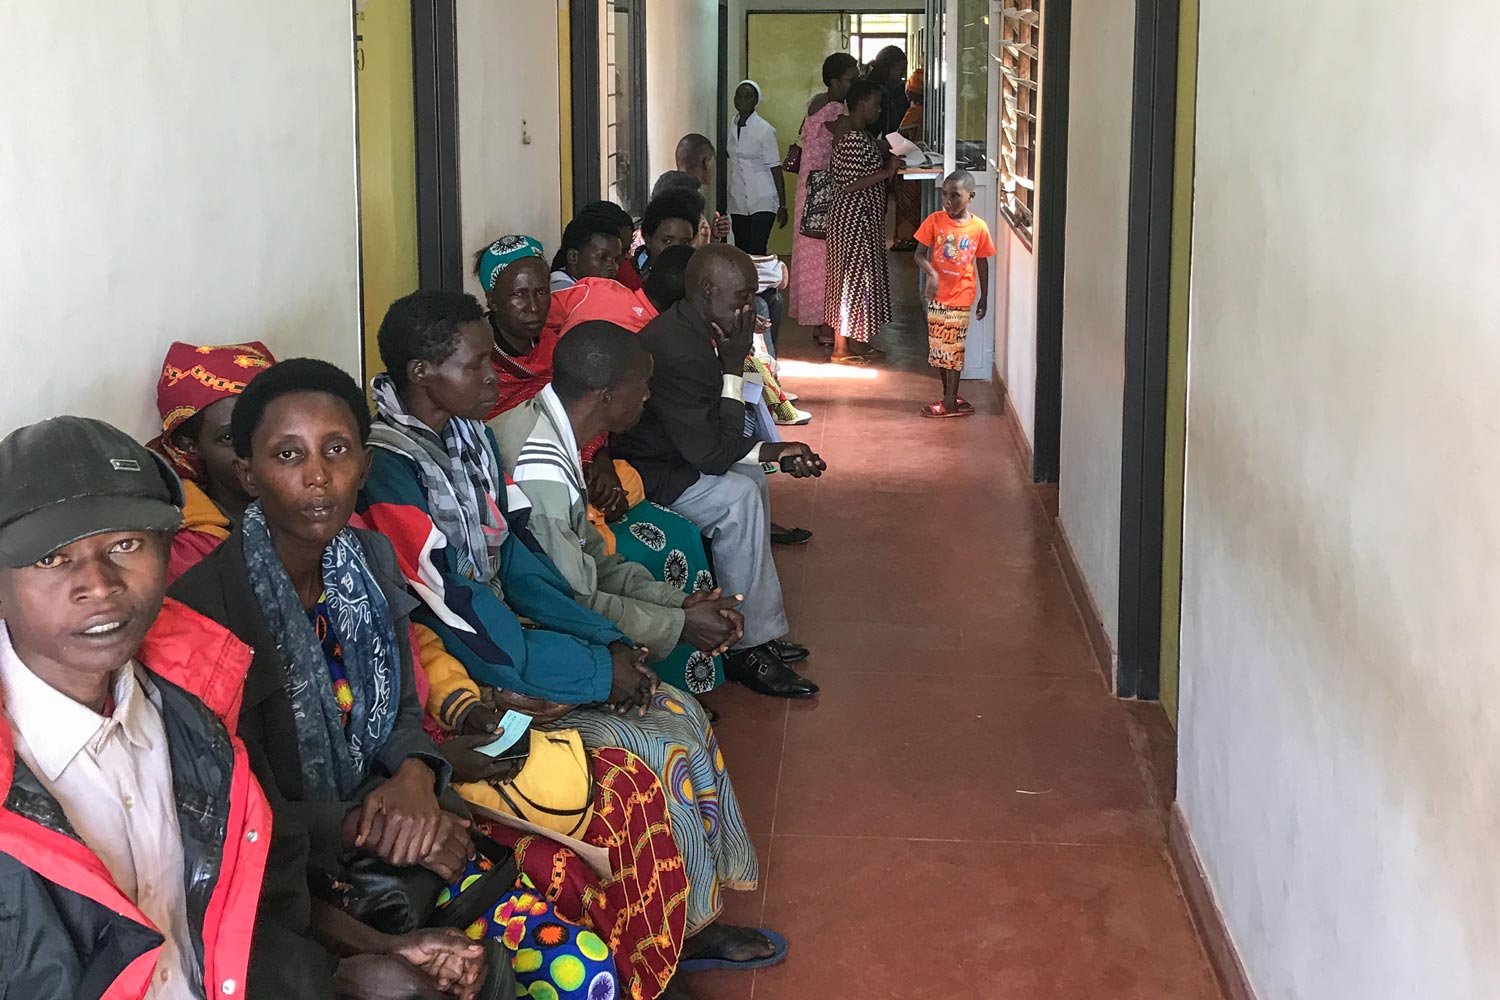 People in Rwanda lined a hallway waiting to be seen by a doctor